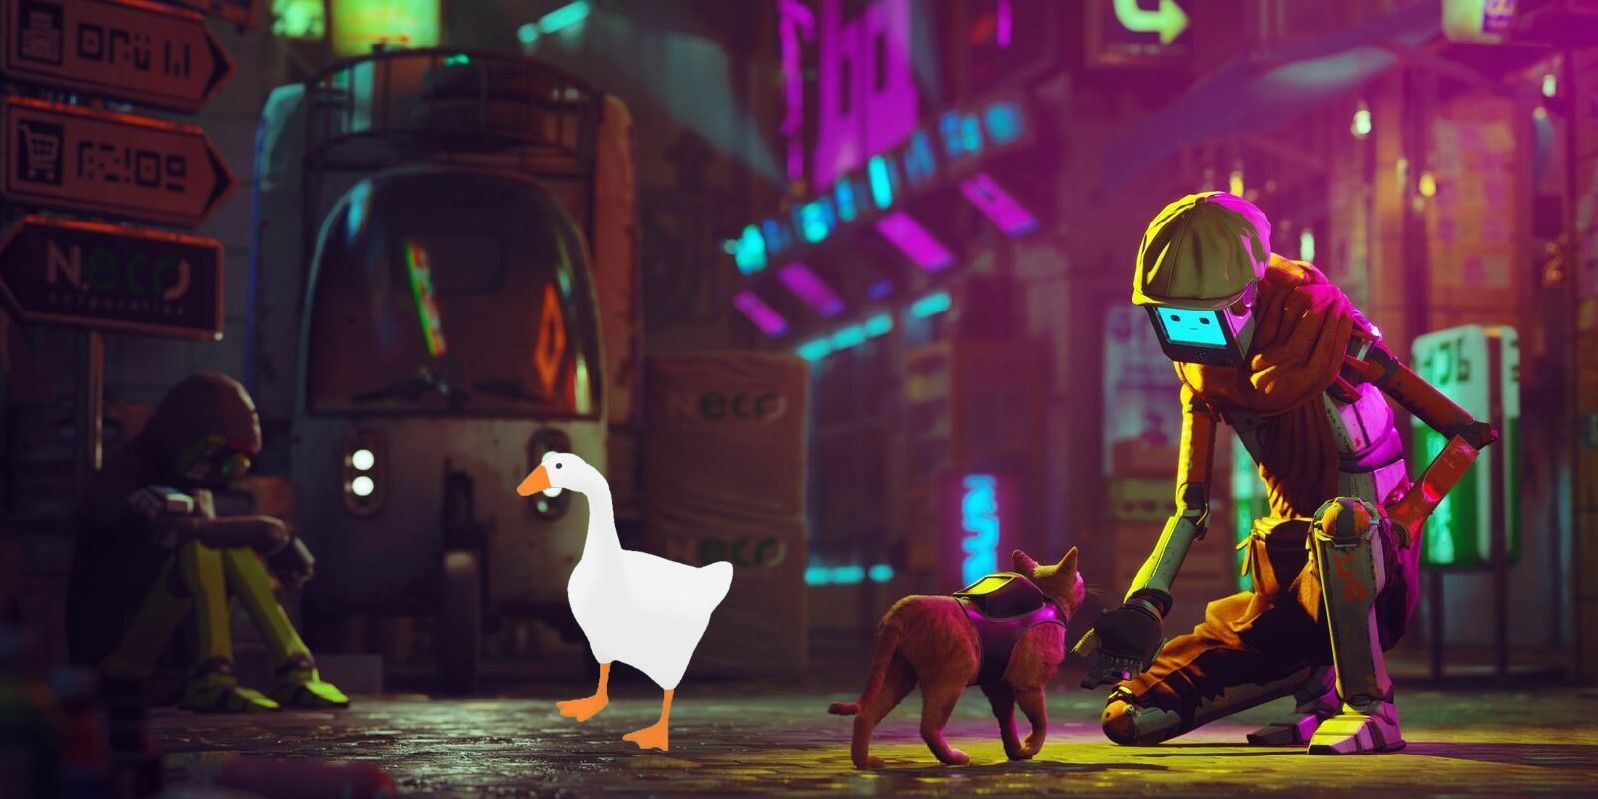 Teaching with videogames: exploring character with 'Untitled Goose